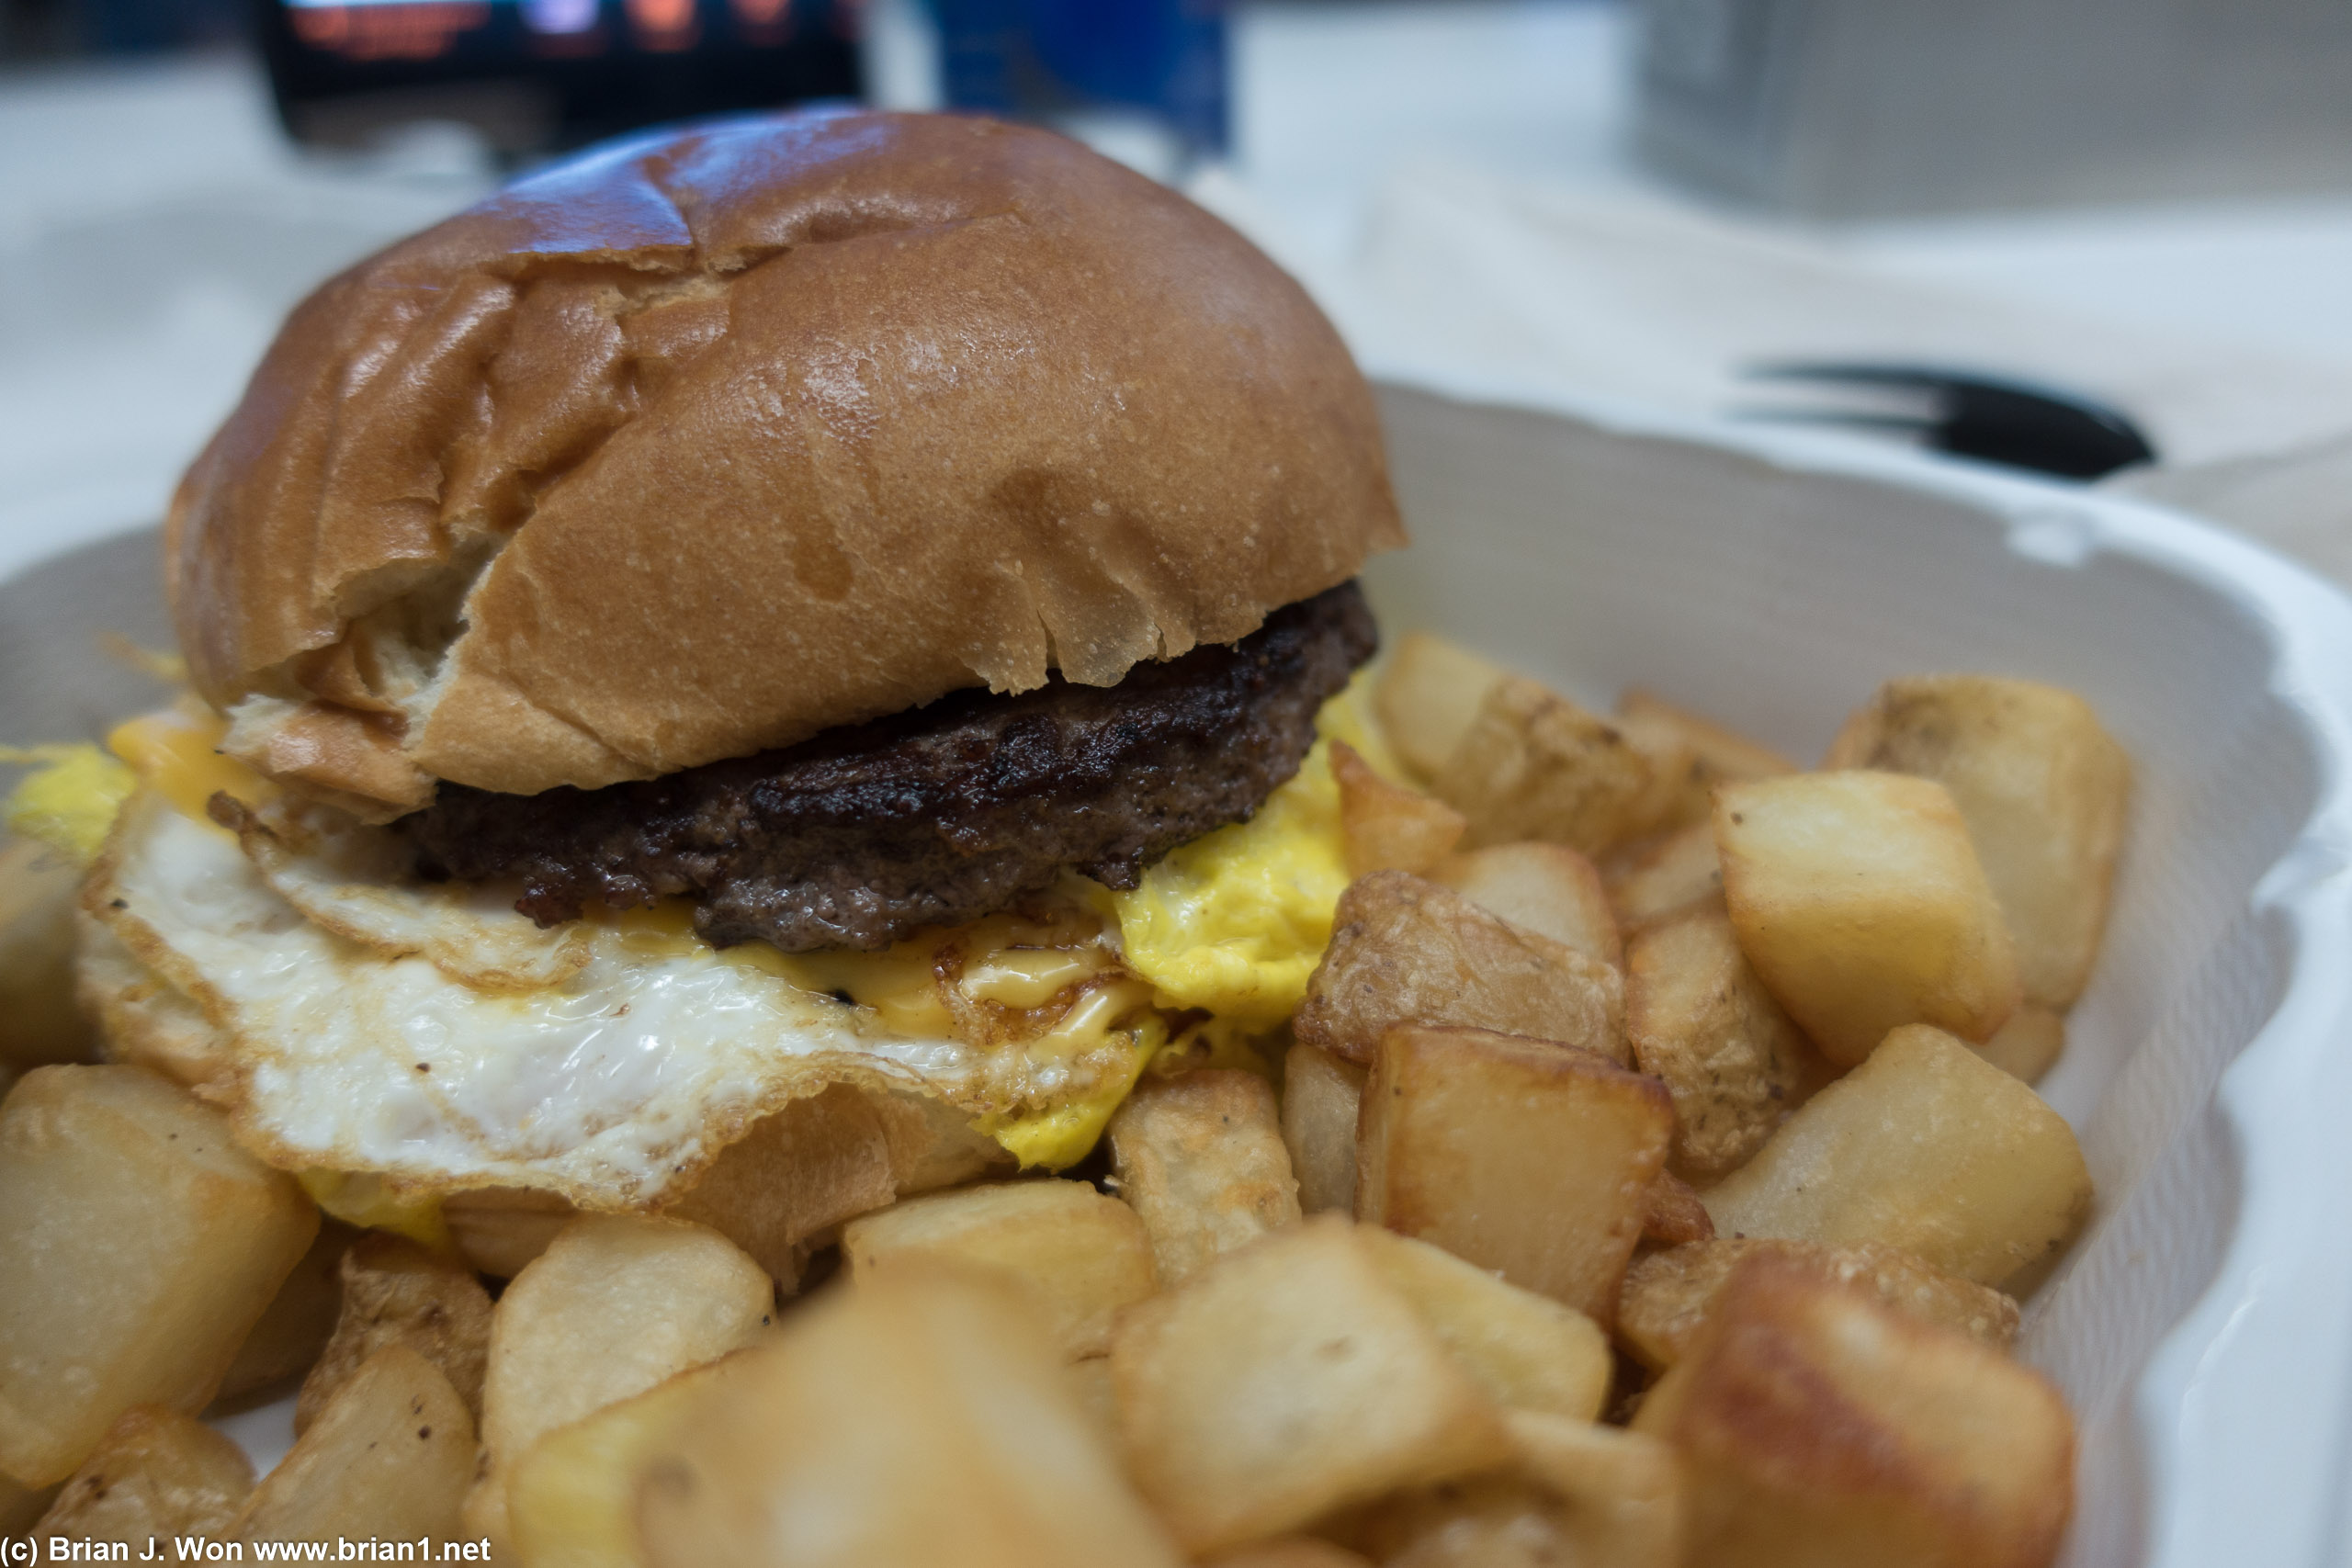 Breakfast burger from Eggy Weggy at the food court, EWR Terminal C. Not bad.